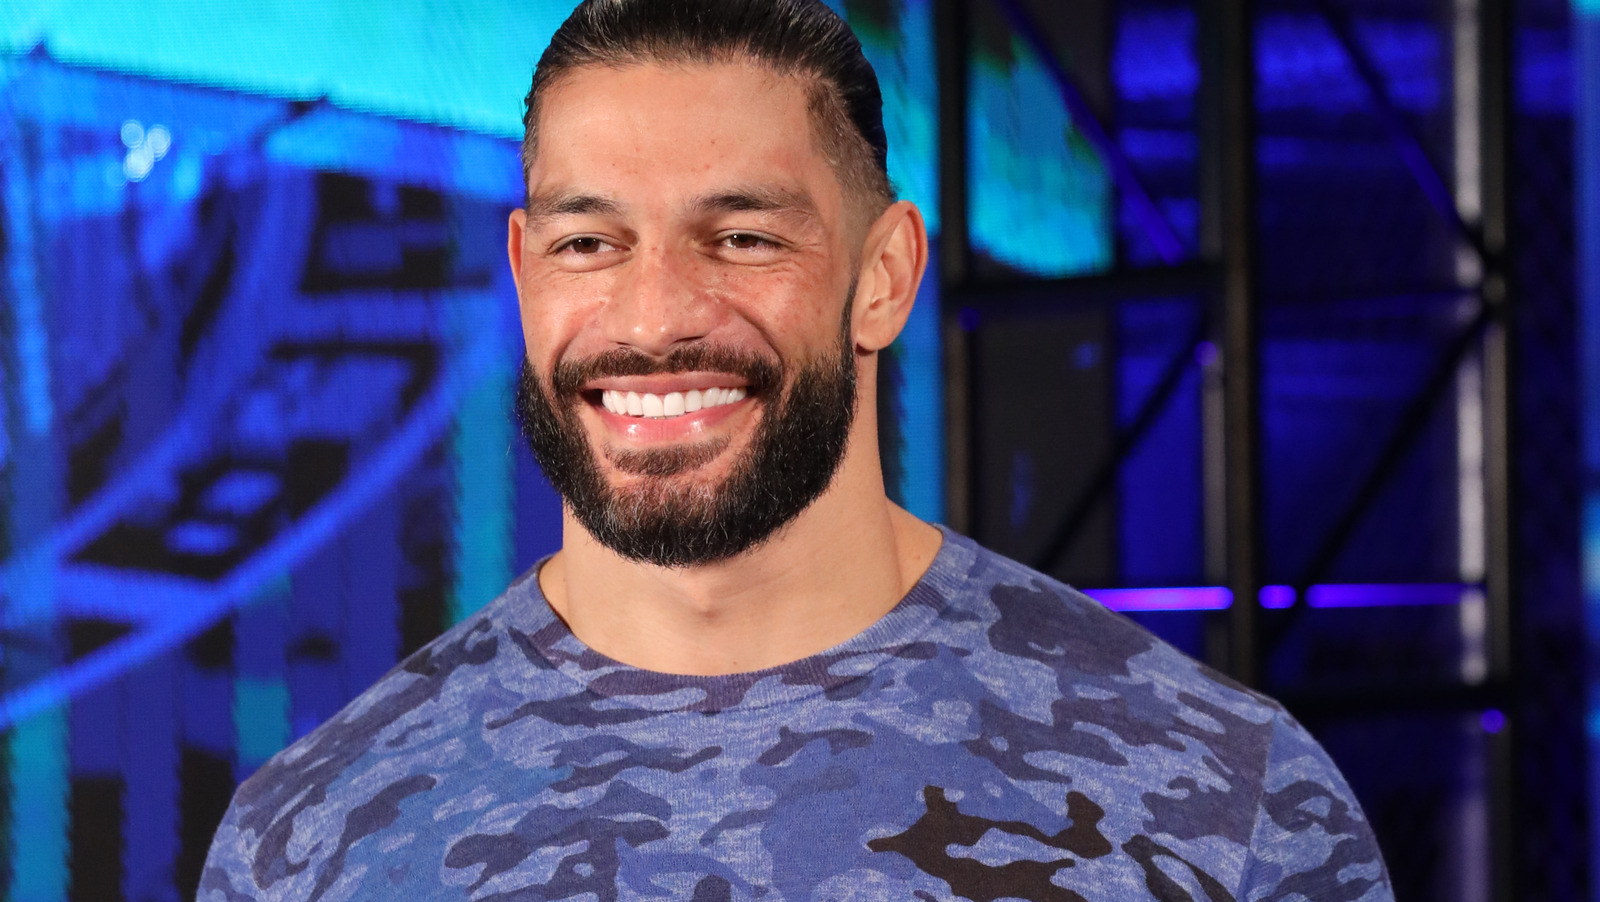 WWE SmackDown Results (3/31): Roman Reigns and Cody Rhodes Final  Confrontation, Bobby Lashley Wins Andre The Giant Memorial Battle Royal,  More - SE Scoops